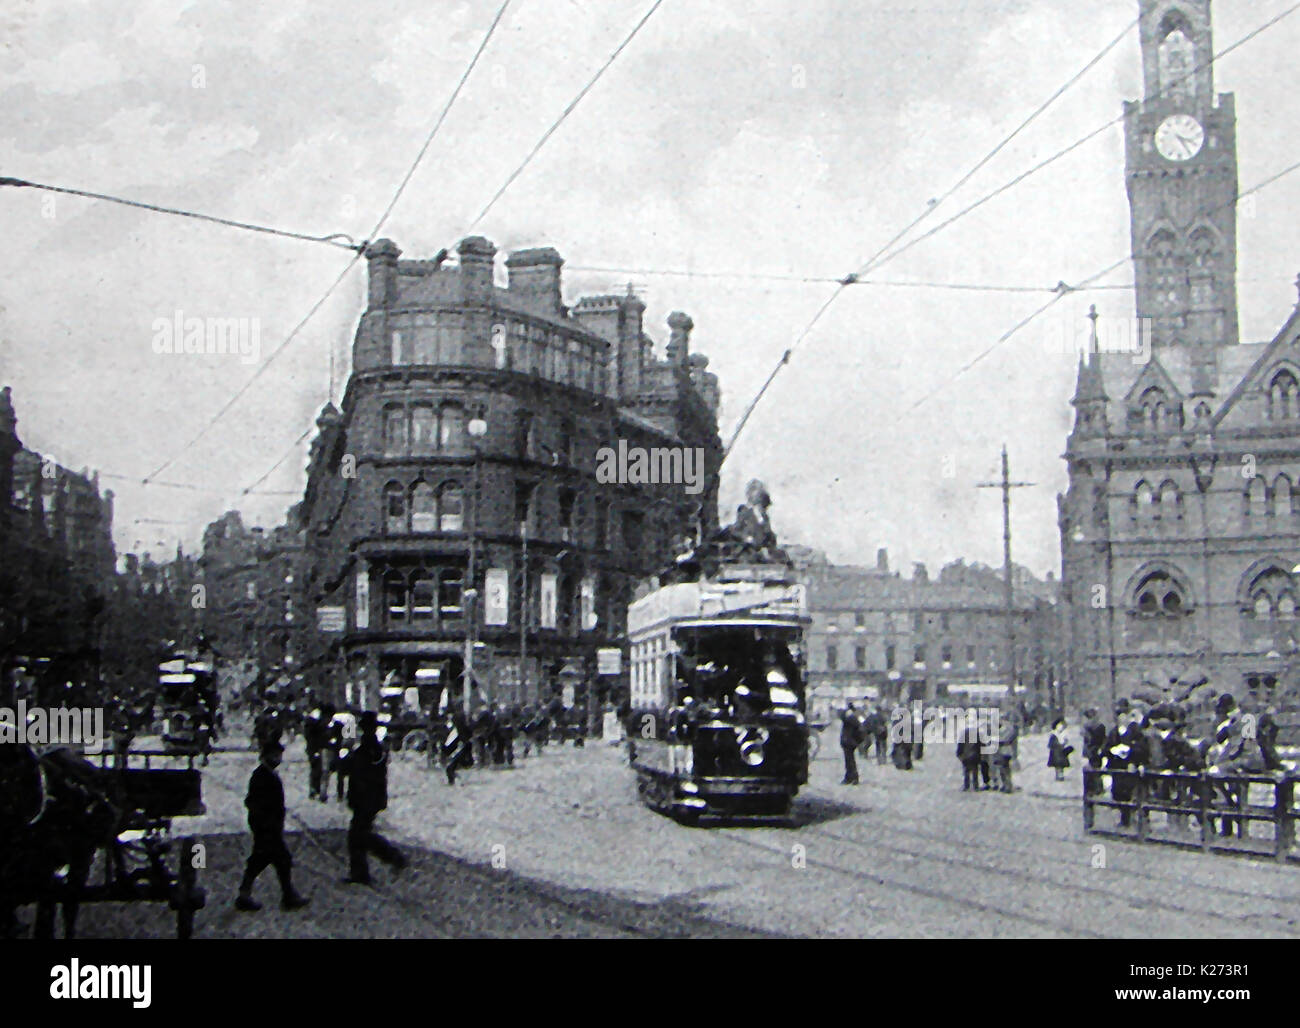 1920 - A street scene in Bradford, England showing a tram outside of the town hallsheds Stock Photo